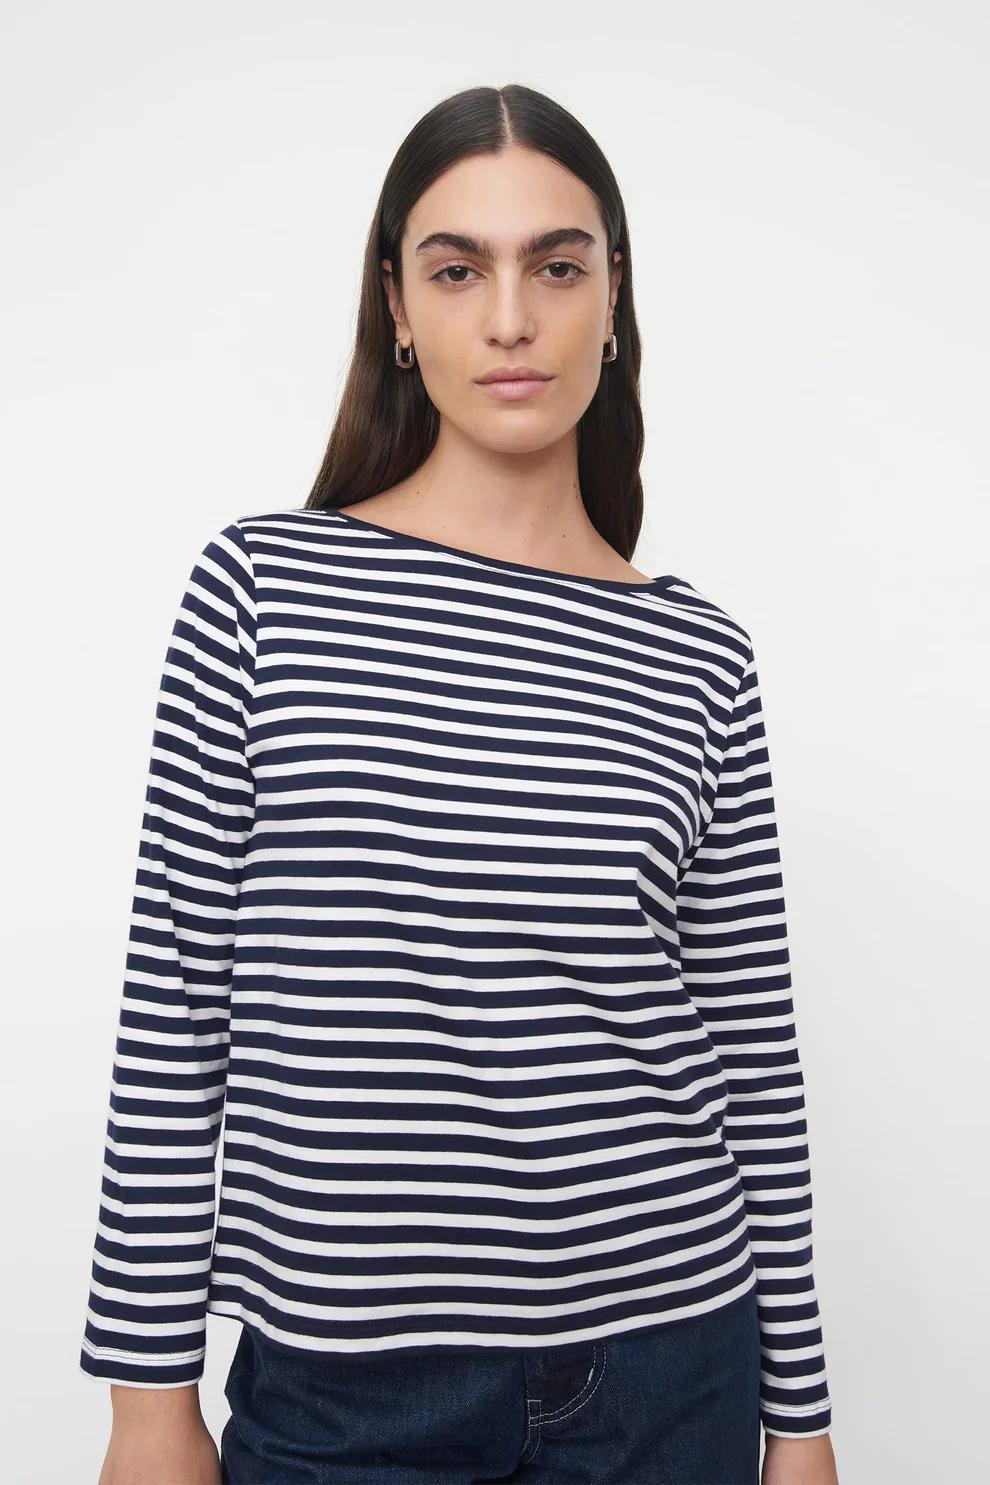 Product Image for Breton Top, Navy Stripe